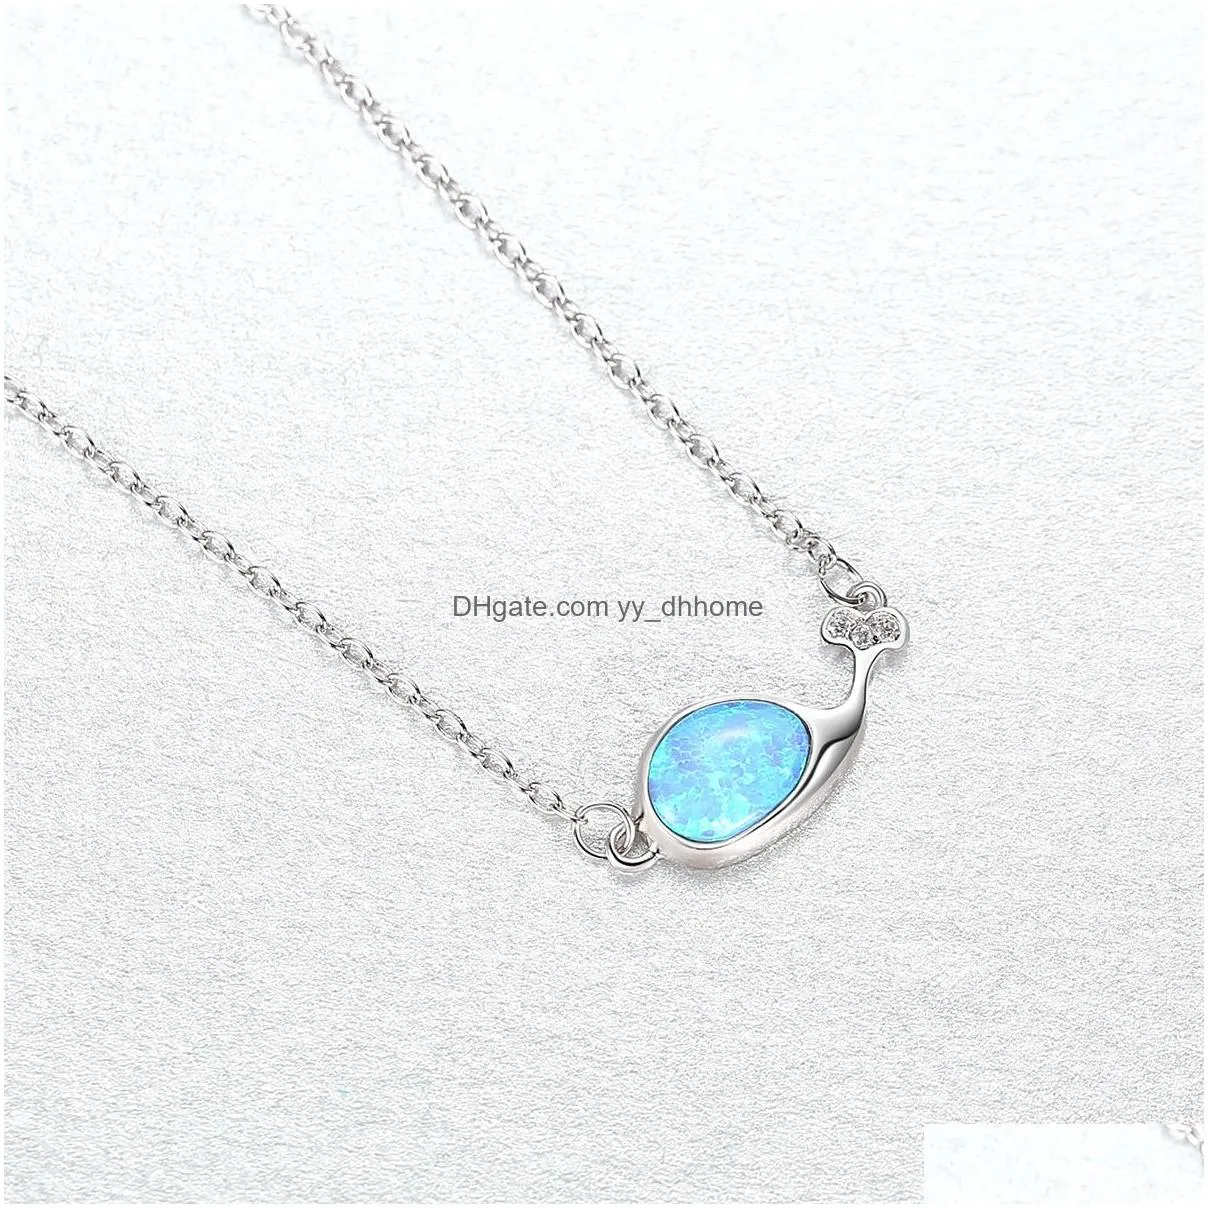 little whale pendant necklace s925 silver set opal exquisite necklace european and american trendy women collar chain high end jewelry valentines day gift